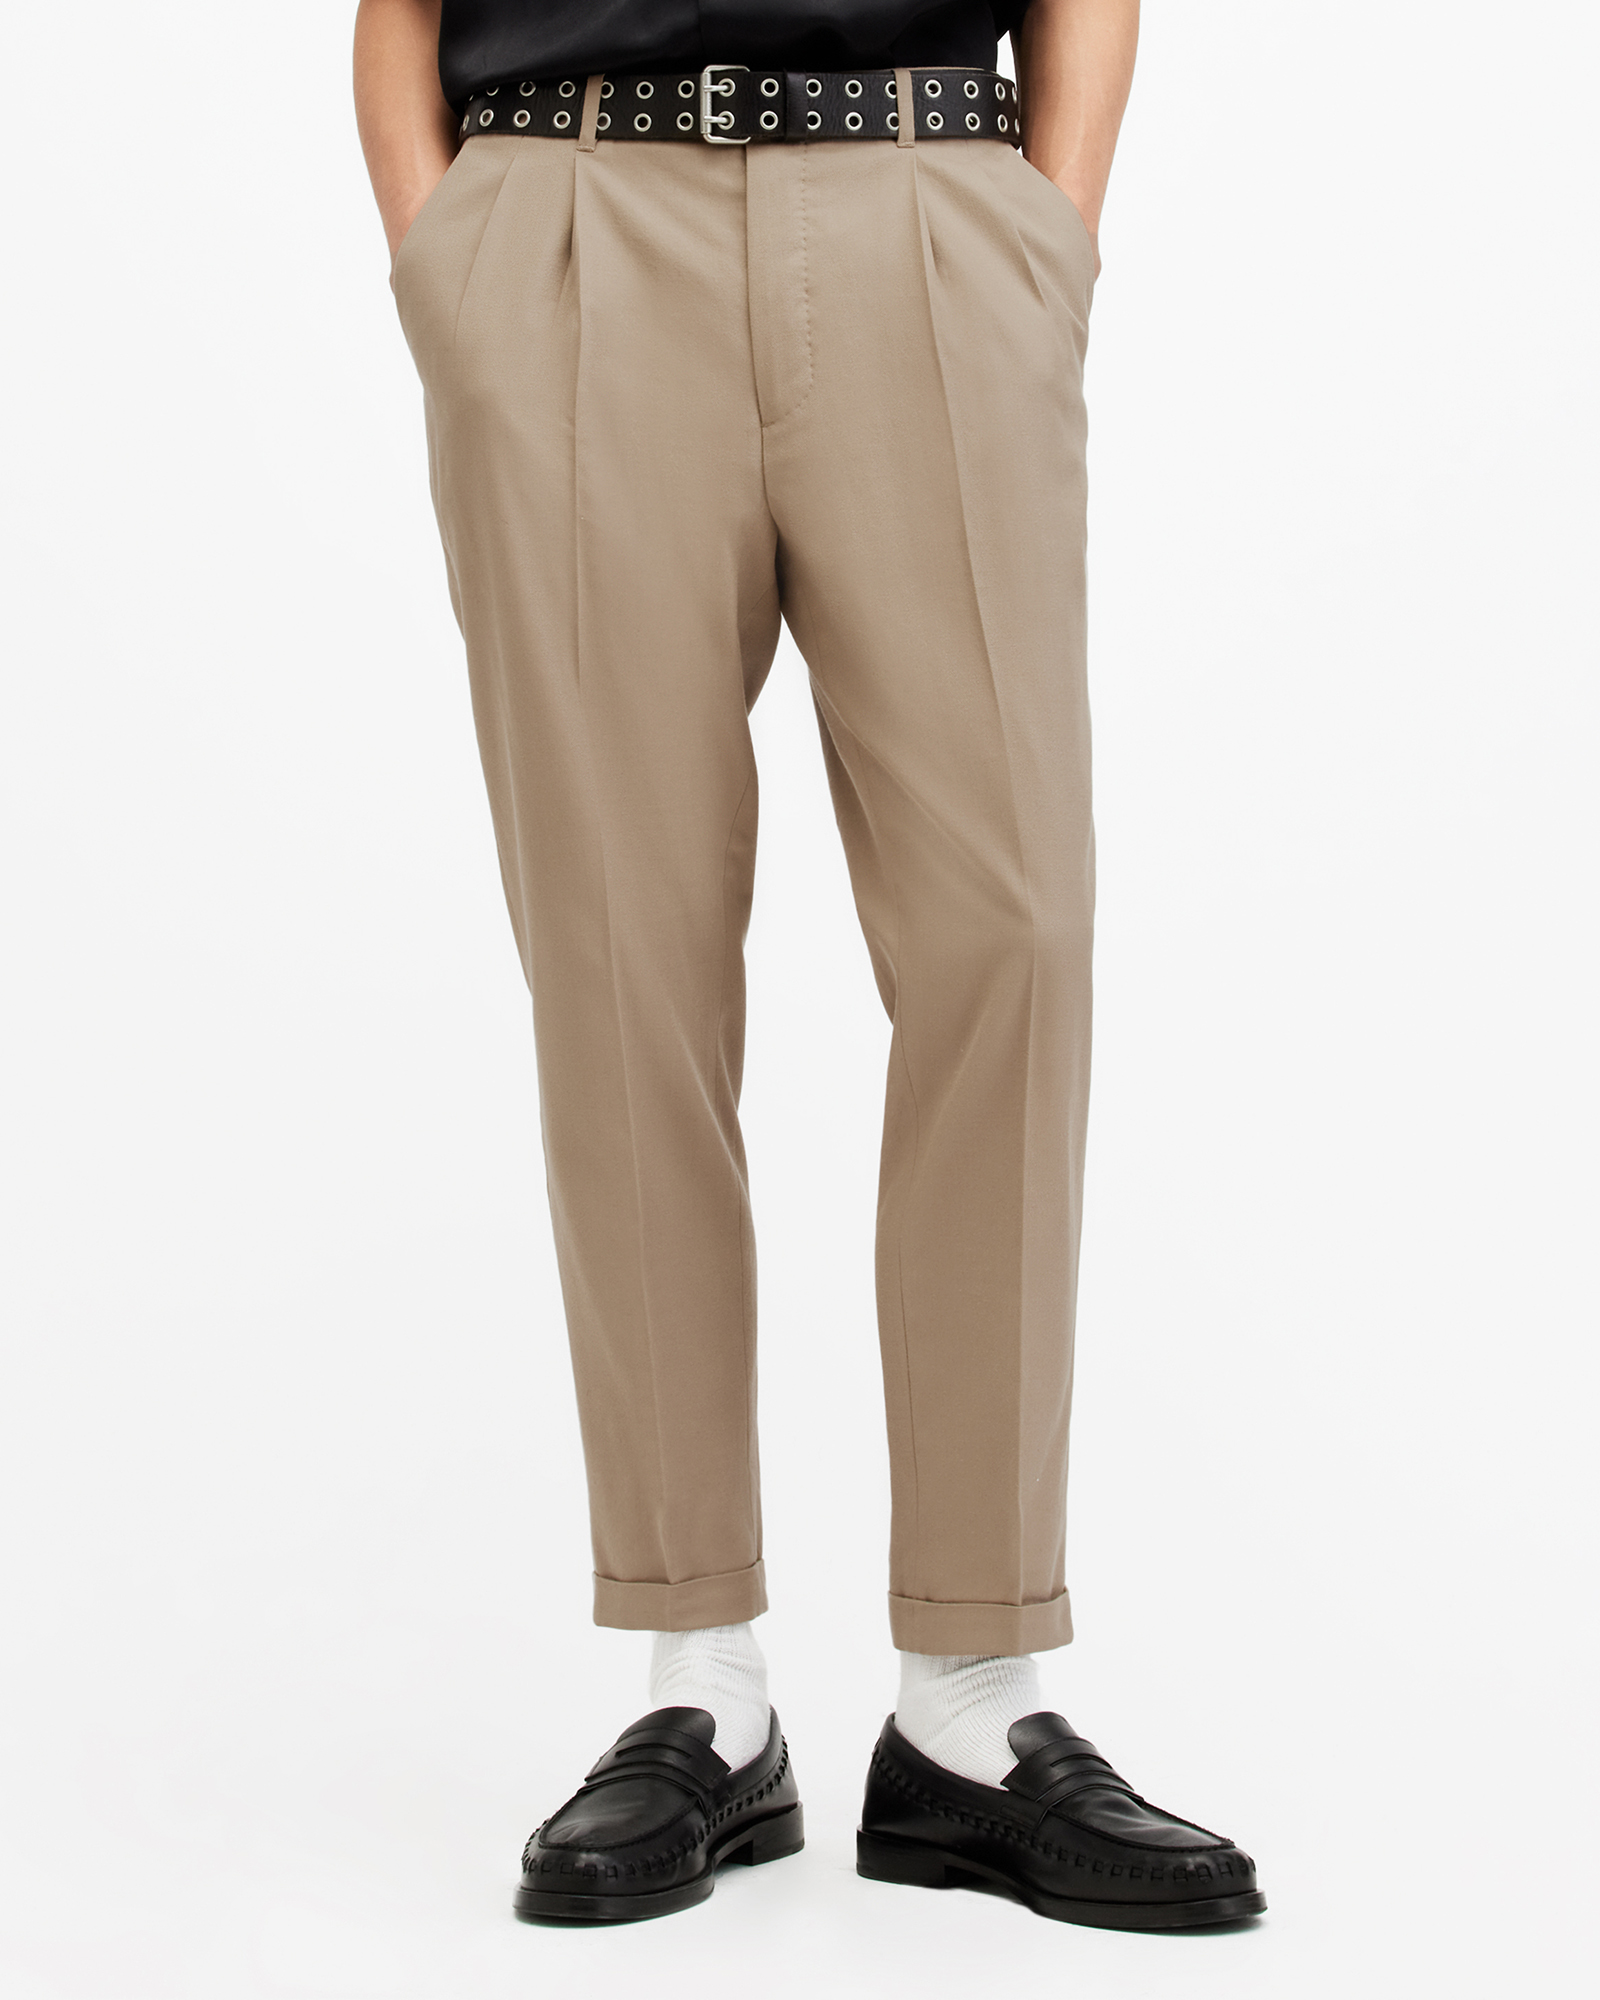 AllSaints Tallis Slim Fit Cropped Tapered Trousers,, MOORLAND BROWN